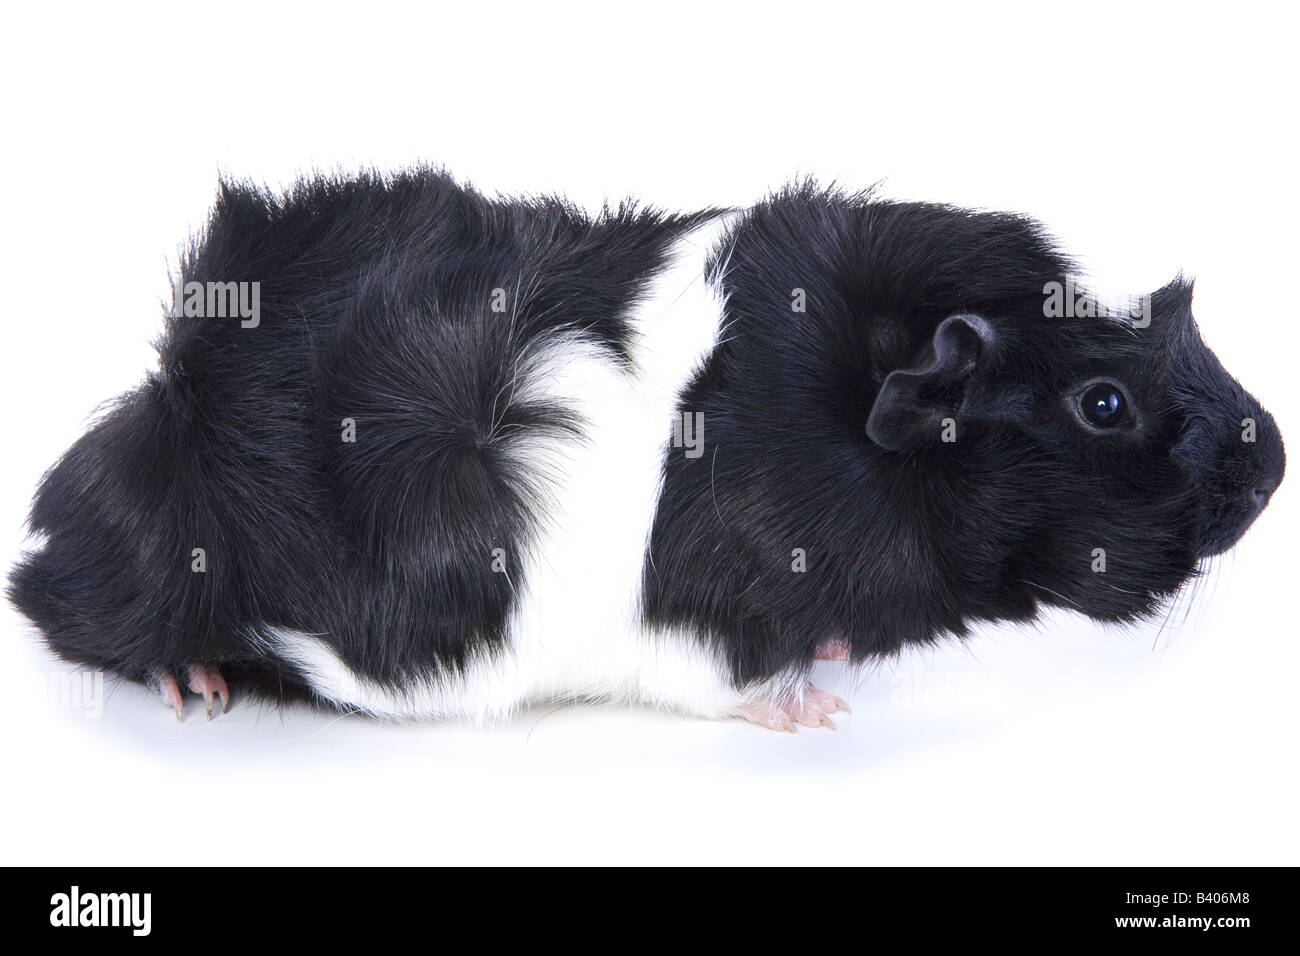 Black and white Abyssinian Guinea pig or Cavy isolated on white background Stock Photo